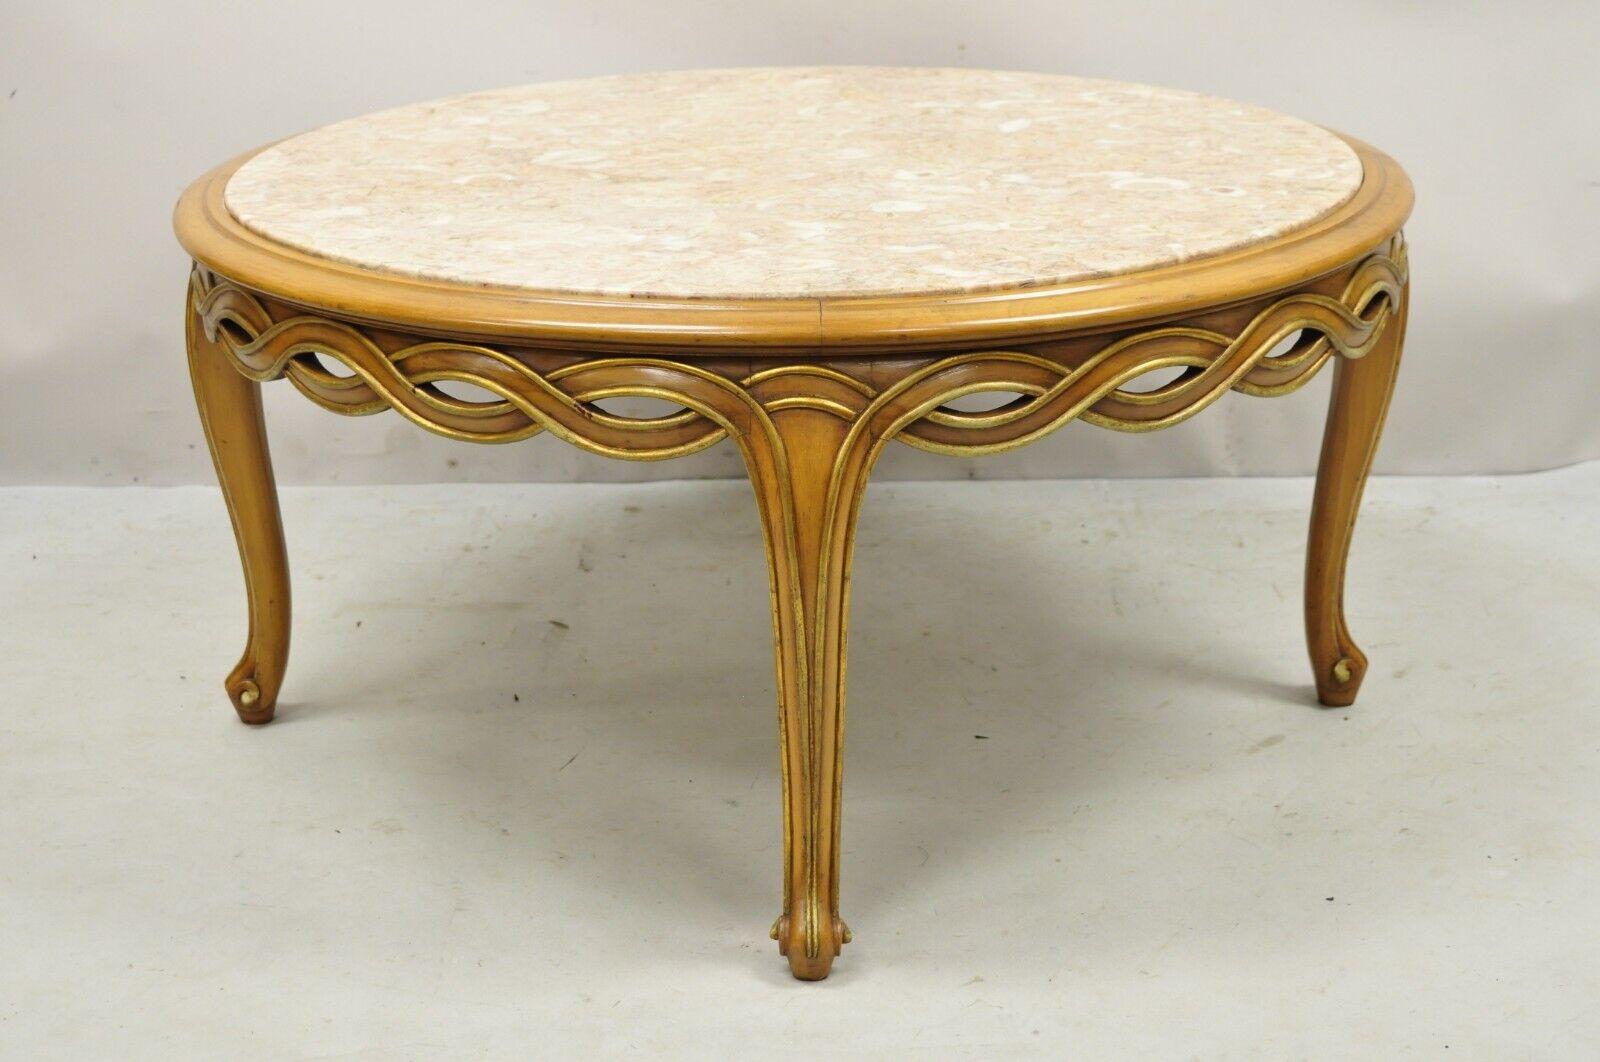 Vintage French Provincial Hollywood Regency pretzel skirt marble top coffee table. Item features a carved interlocking woven skirt, inset marble top, cabriole legs, very nice vintage item, great style and form. Circa mid 20th century.
Measurements: